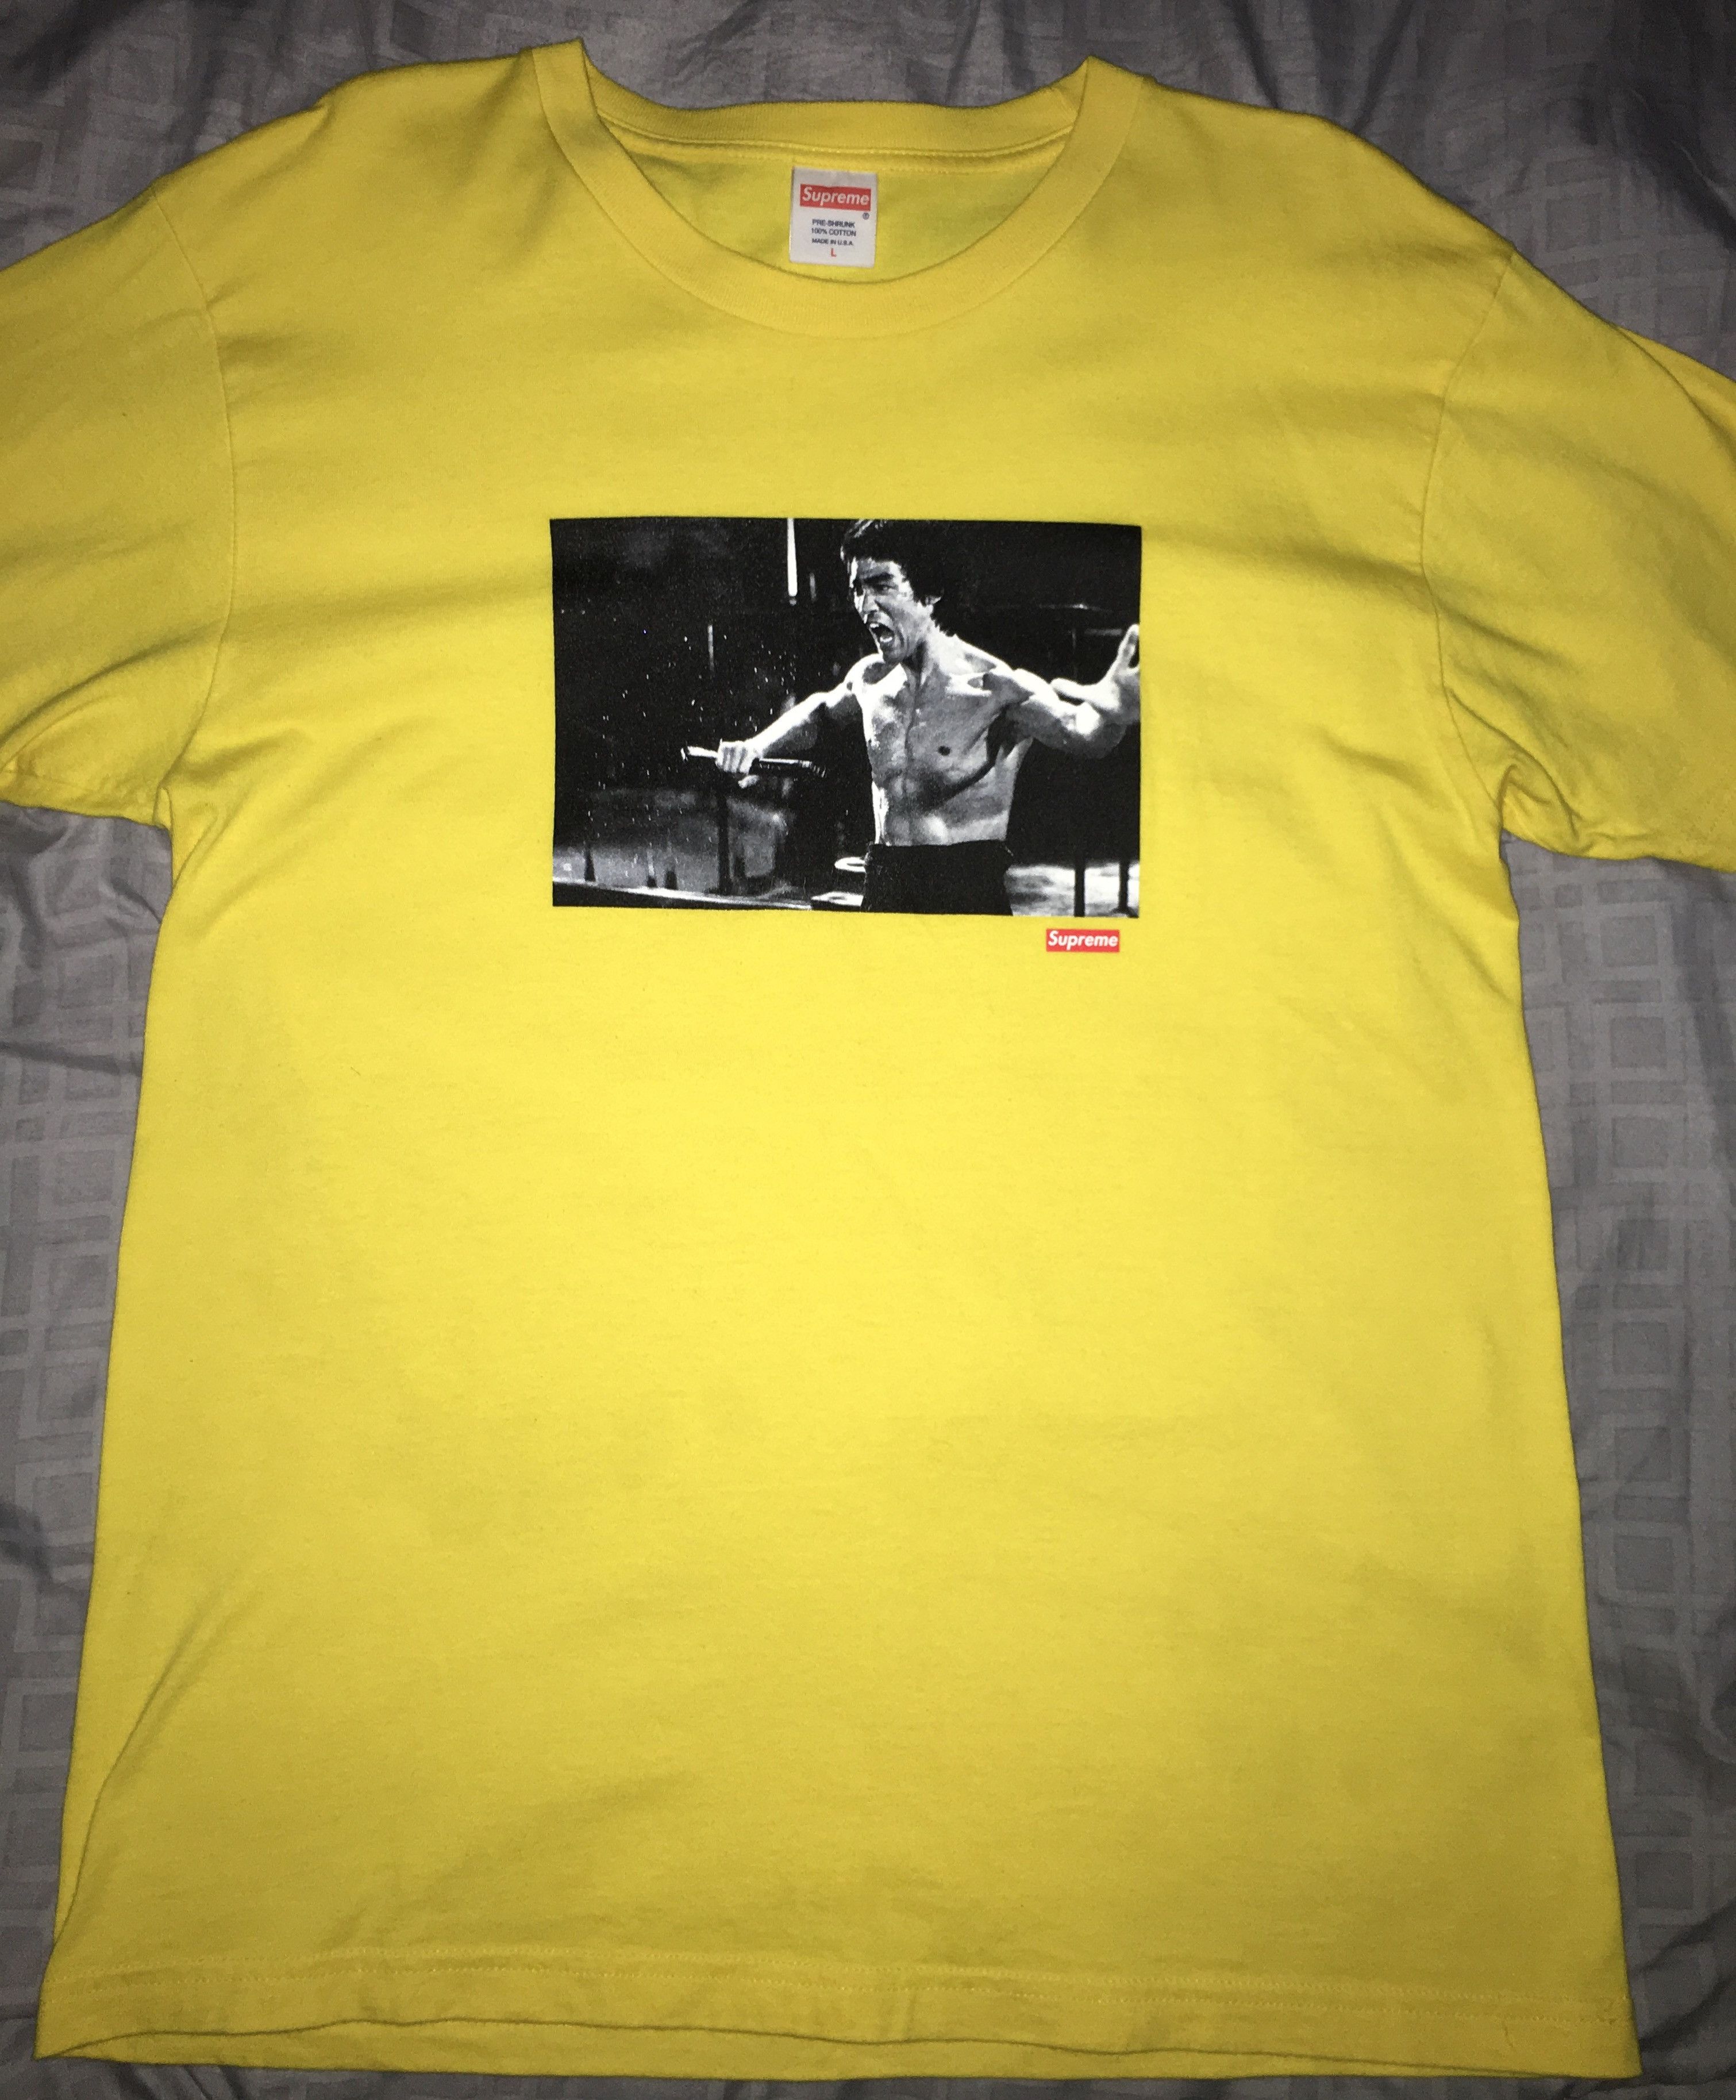 FS] Red Supreme Bruce Lee Enter The Dragon Tee - Medium $100 shipped :  r/supremeclothing